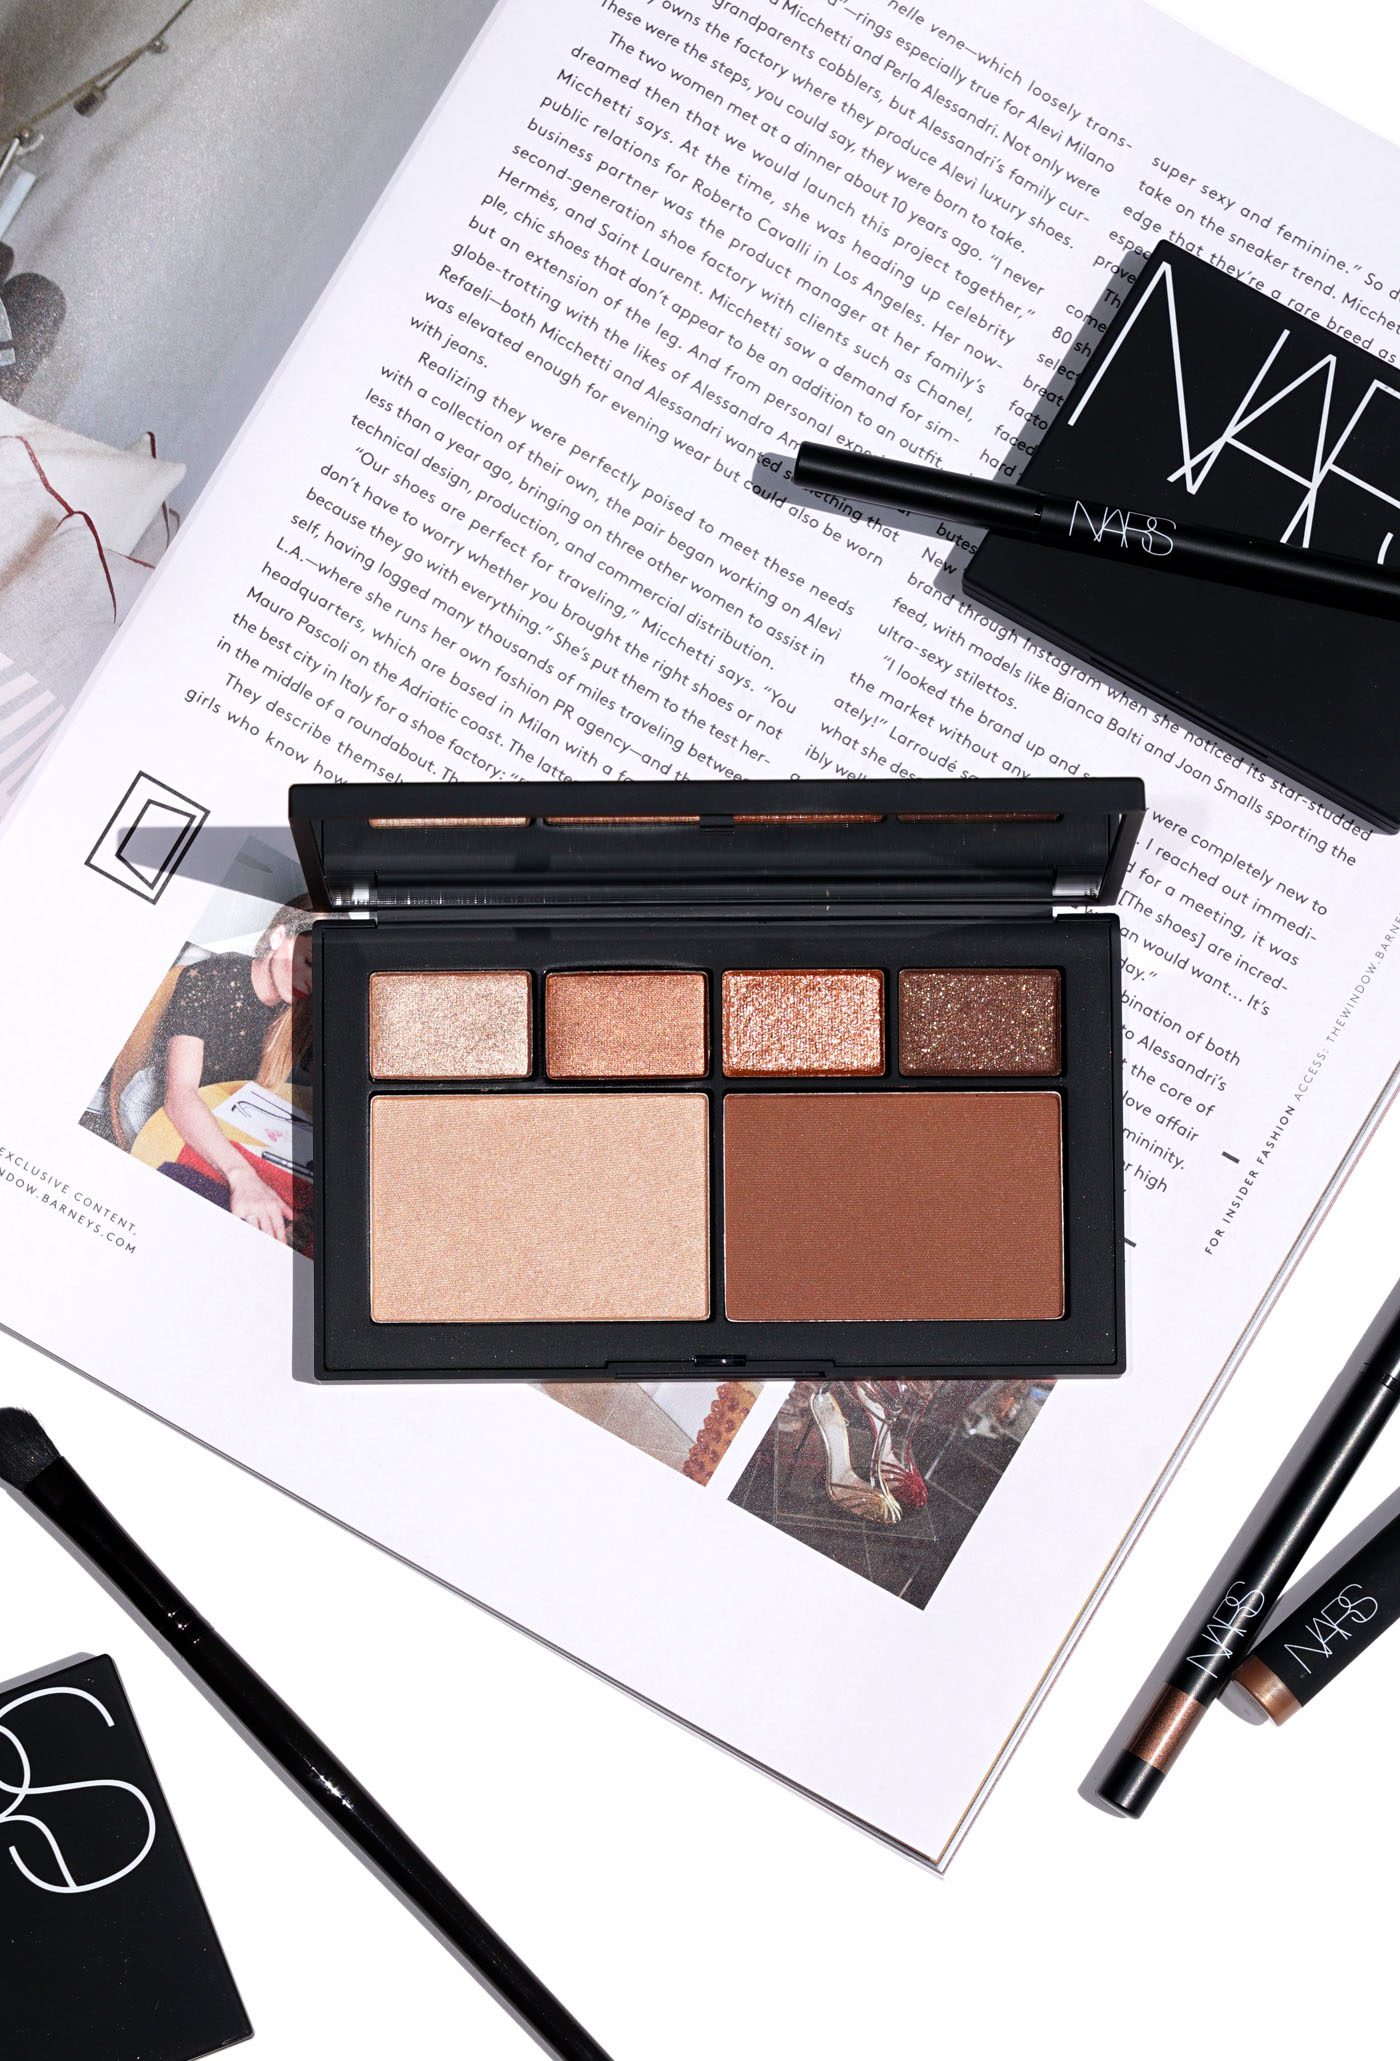 NARS Atomic Blonde Eye and Cheek Palette Review | The Beauty Look Book